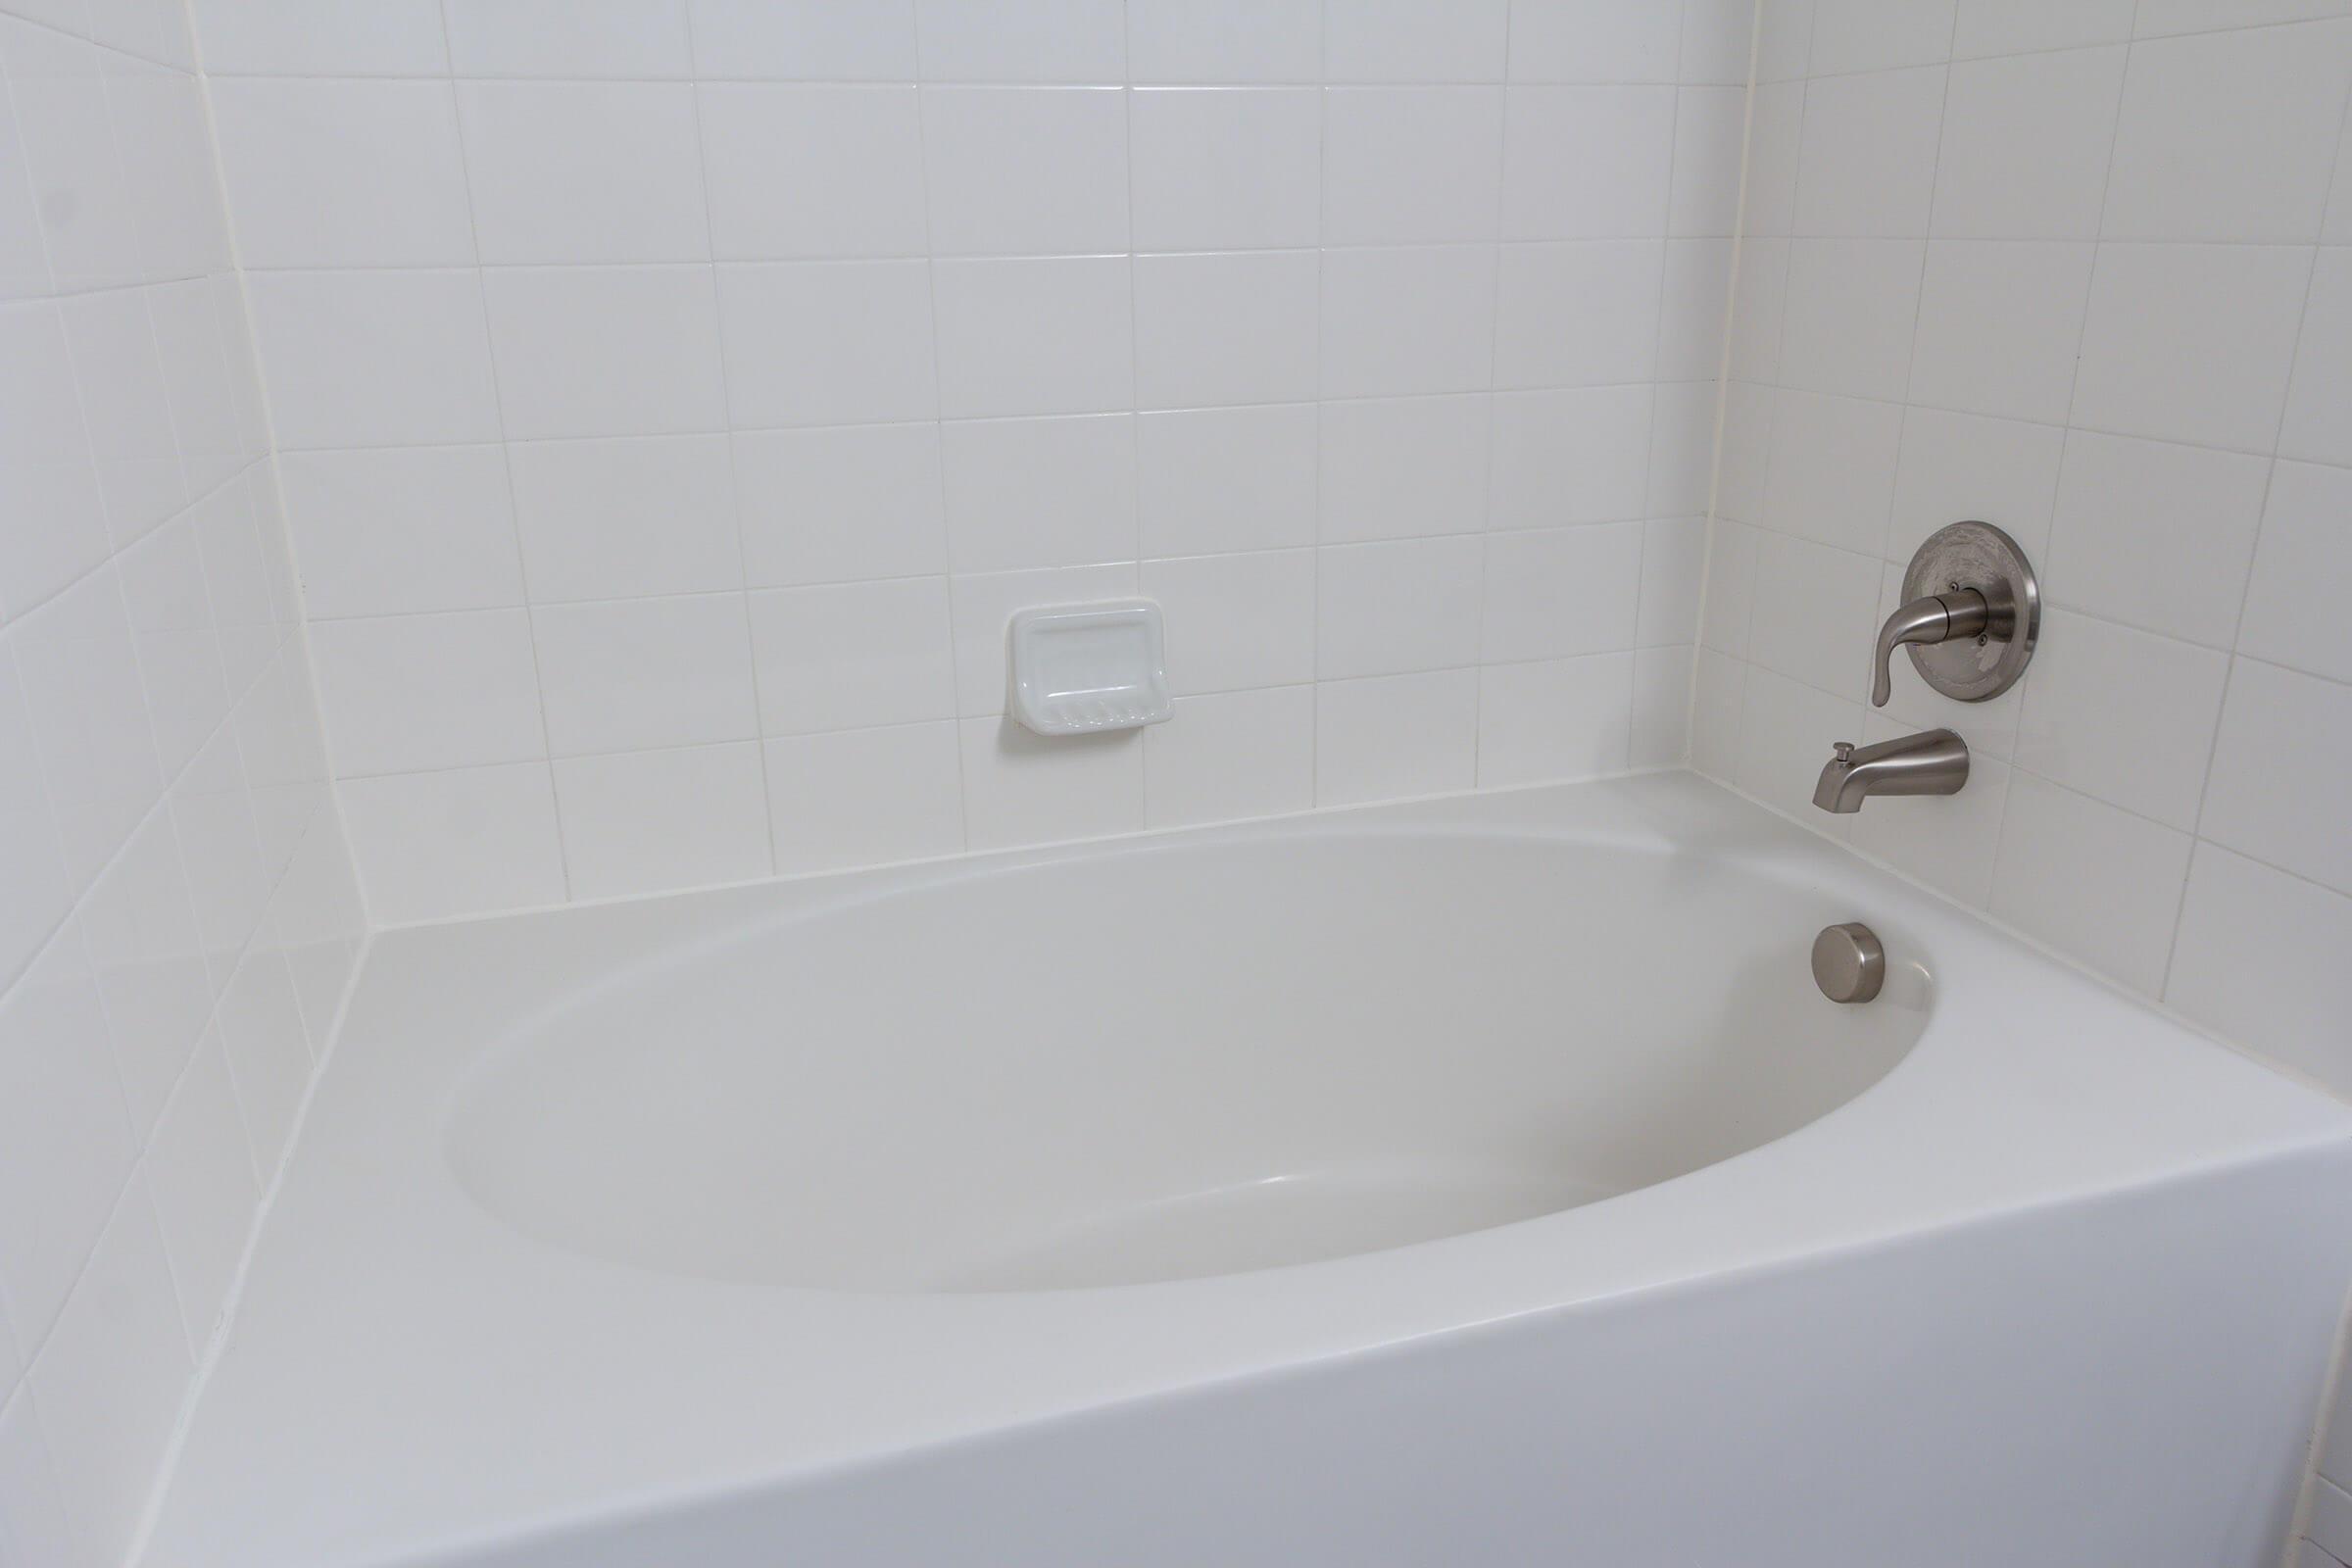 a close up of a sink and a bath tub